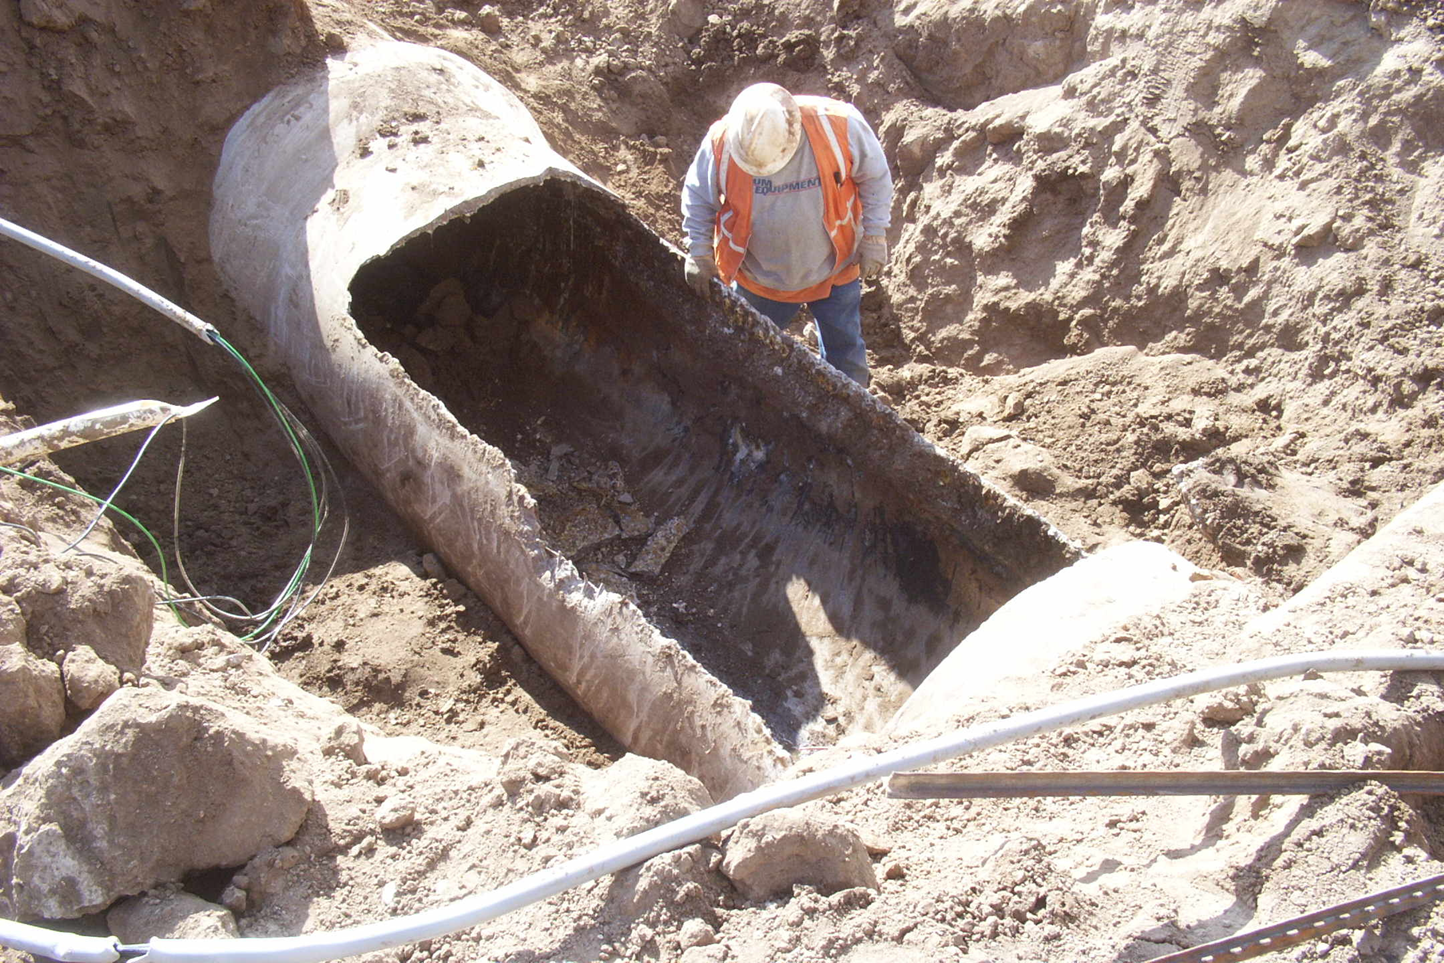 http://zonge.com/wp-content/uploads/2013/06/sewer-pipe-corrosion.png